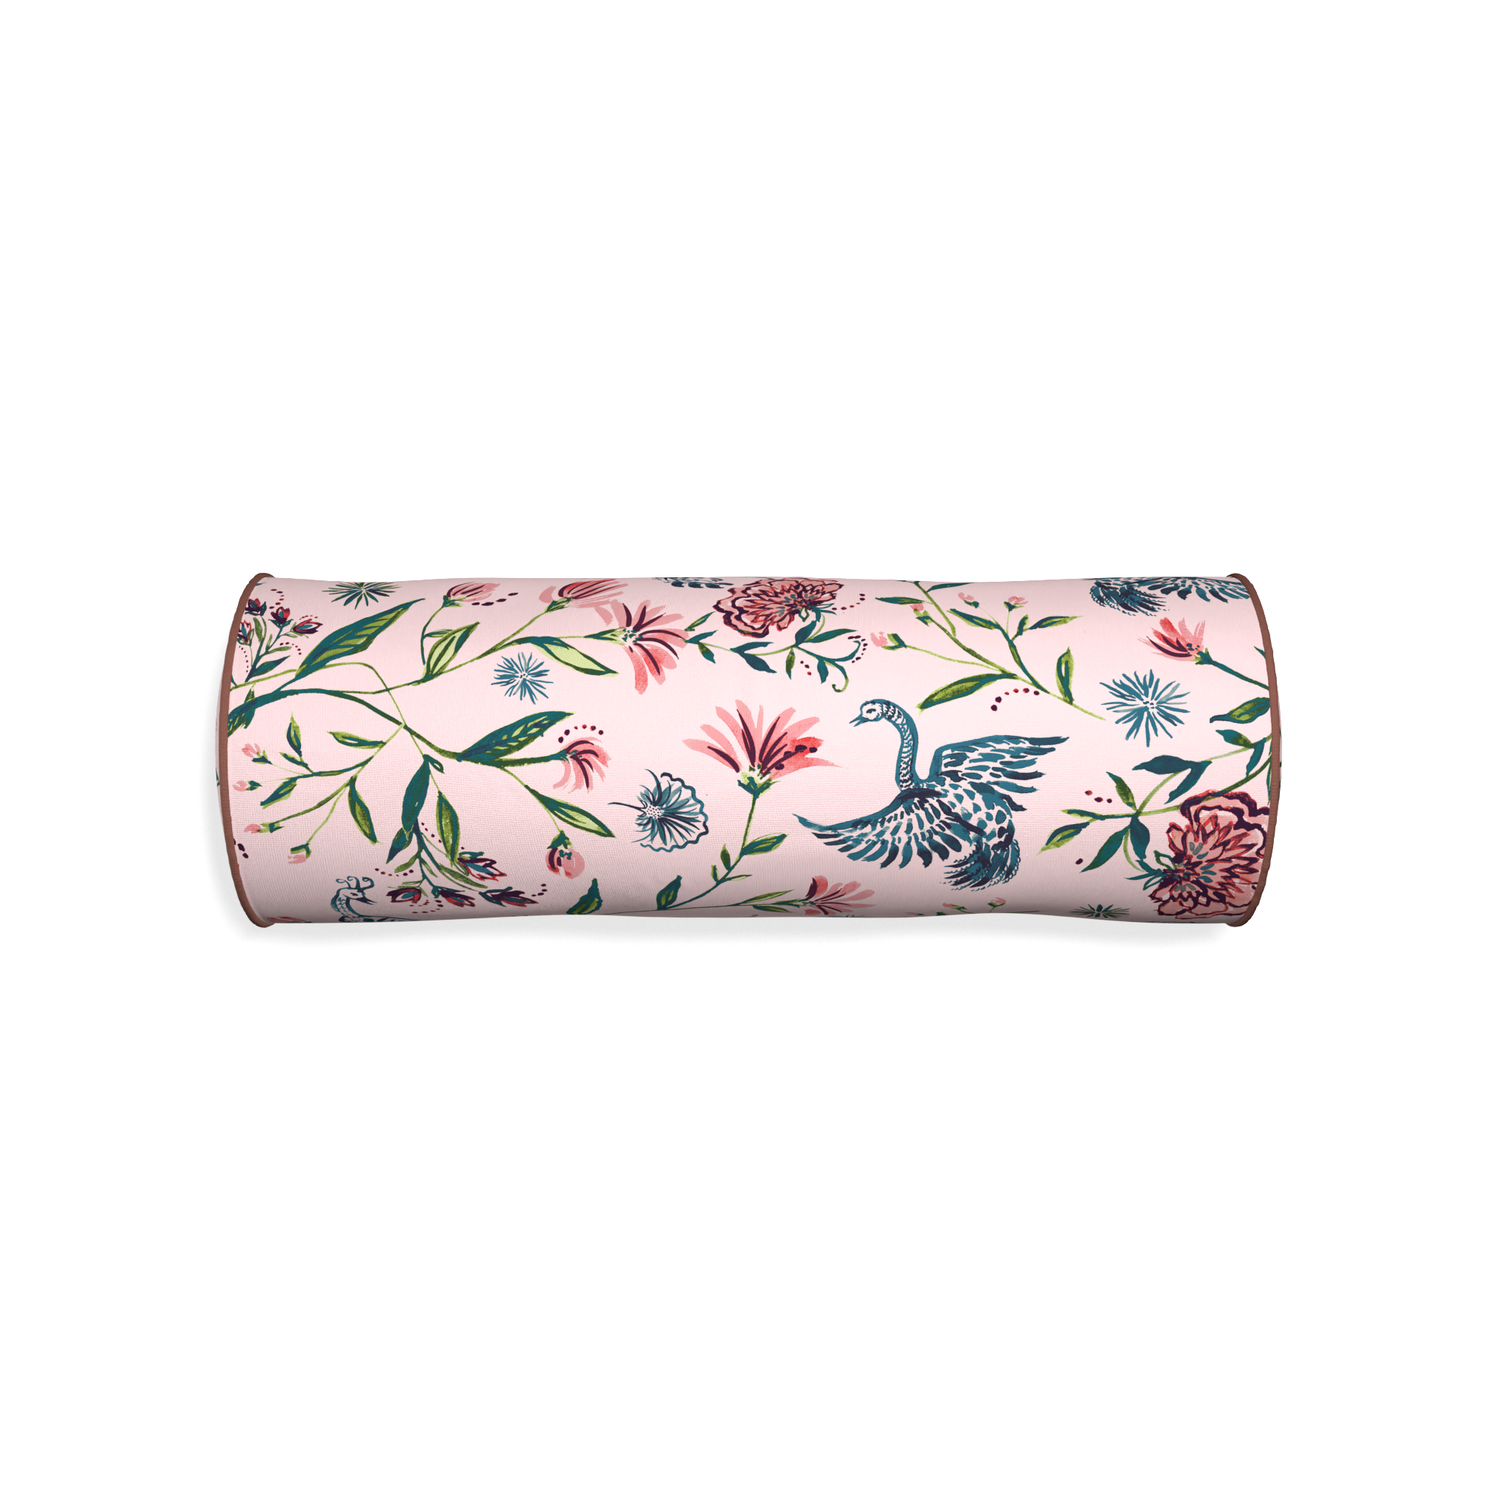 Bolster daphne rose custom rose chinoiseriepillow with w piping on white background